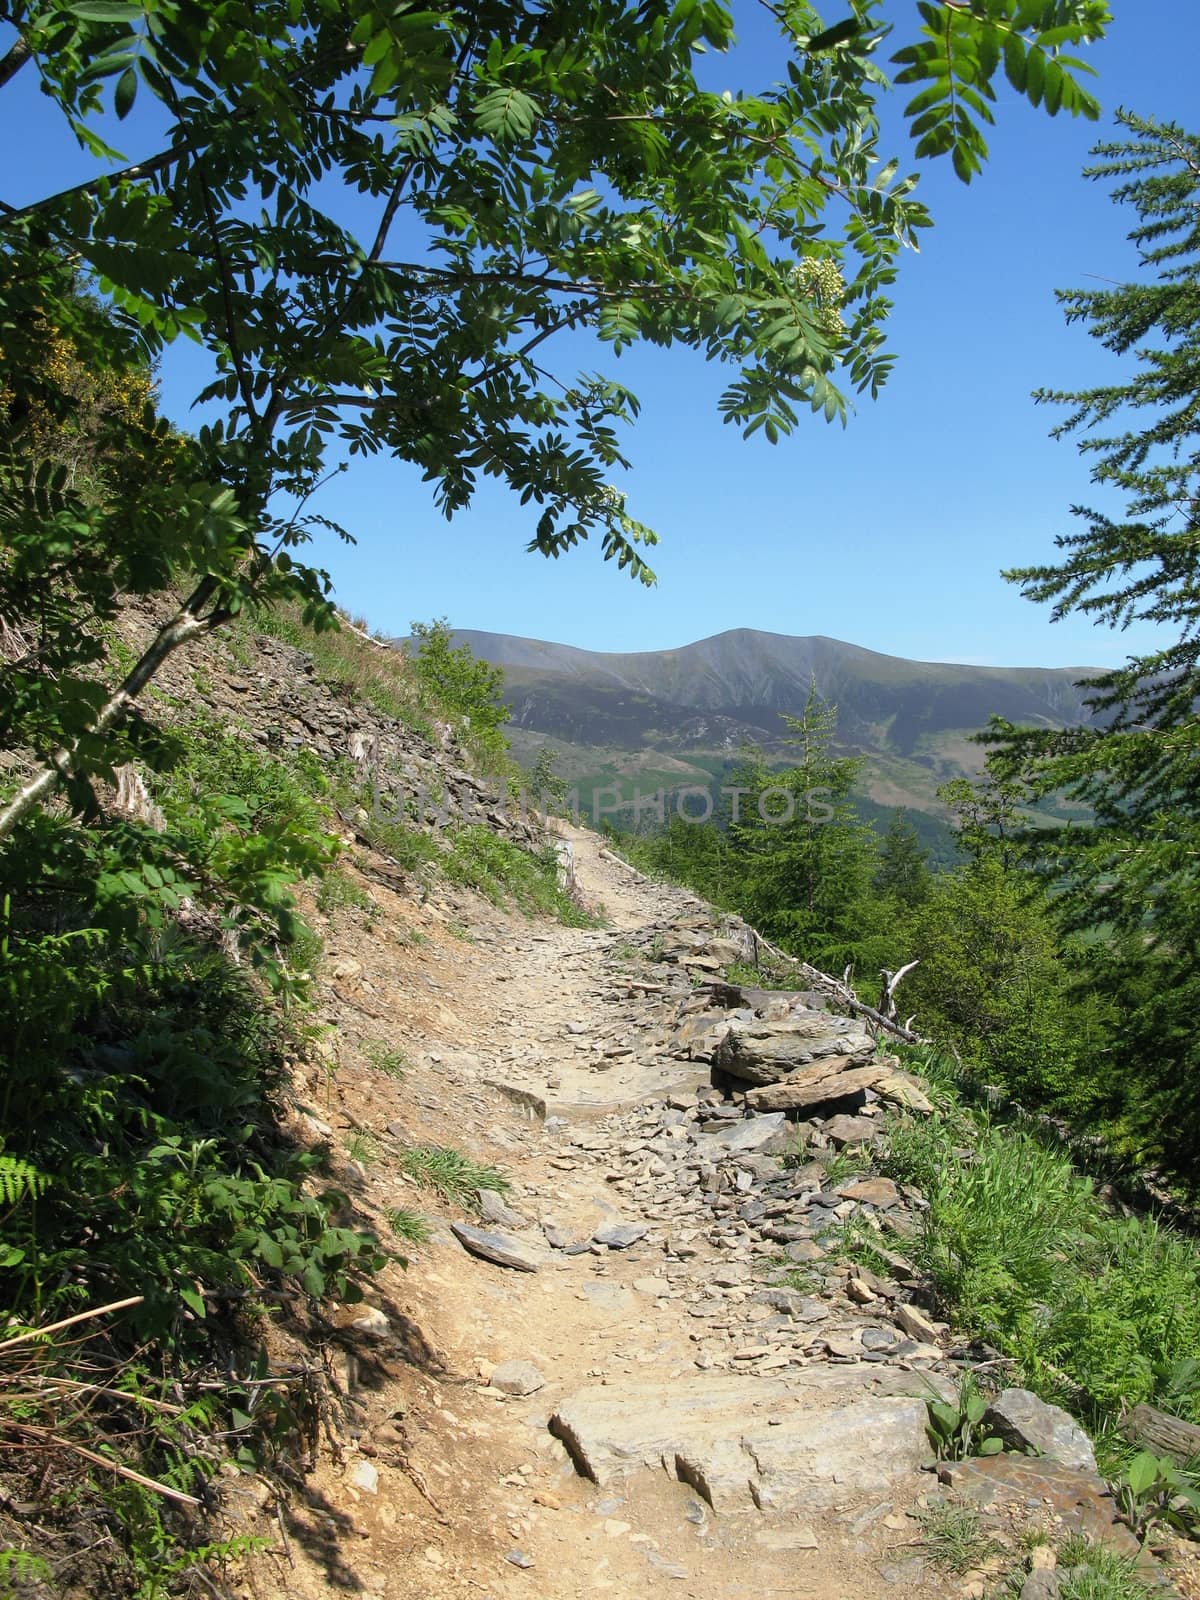 a rock covered path or trail on the side of a mountain